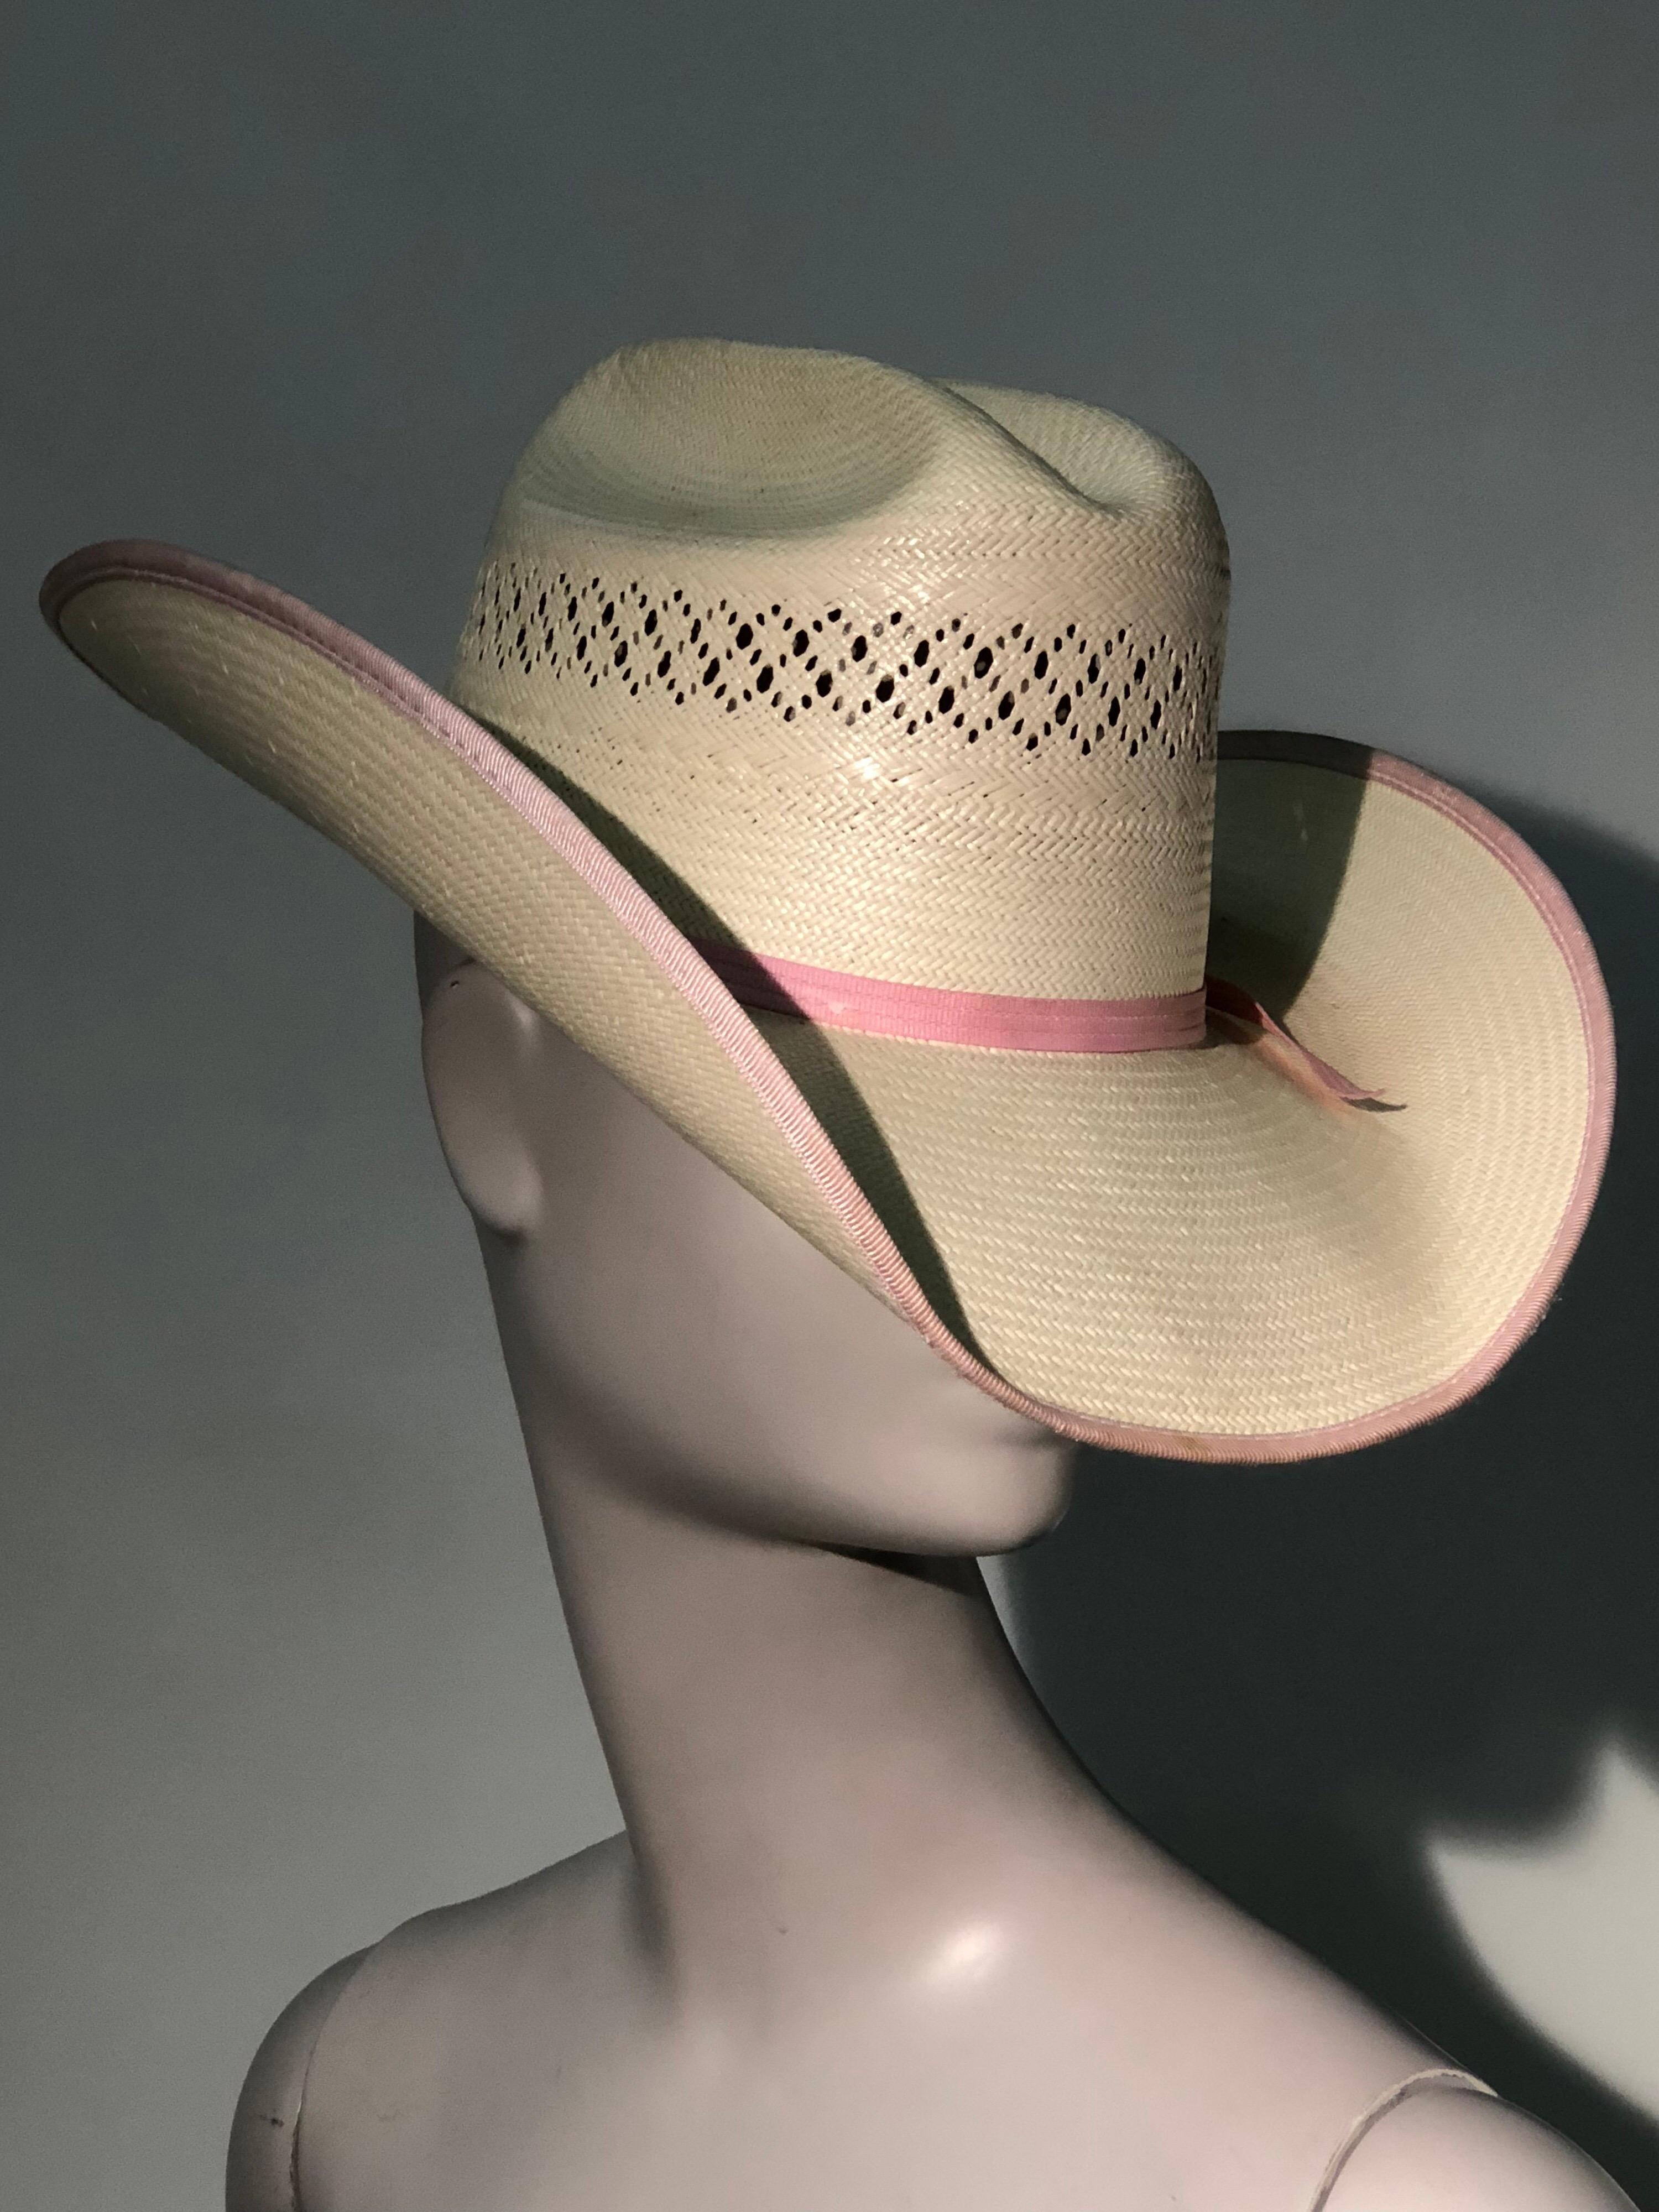 1980s Tony Lama Structured Straw Cowgirl Hat W/ Pink Ribbon Edging & Band For Sale 1